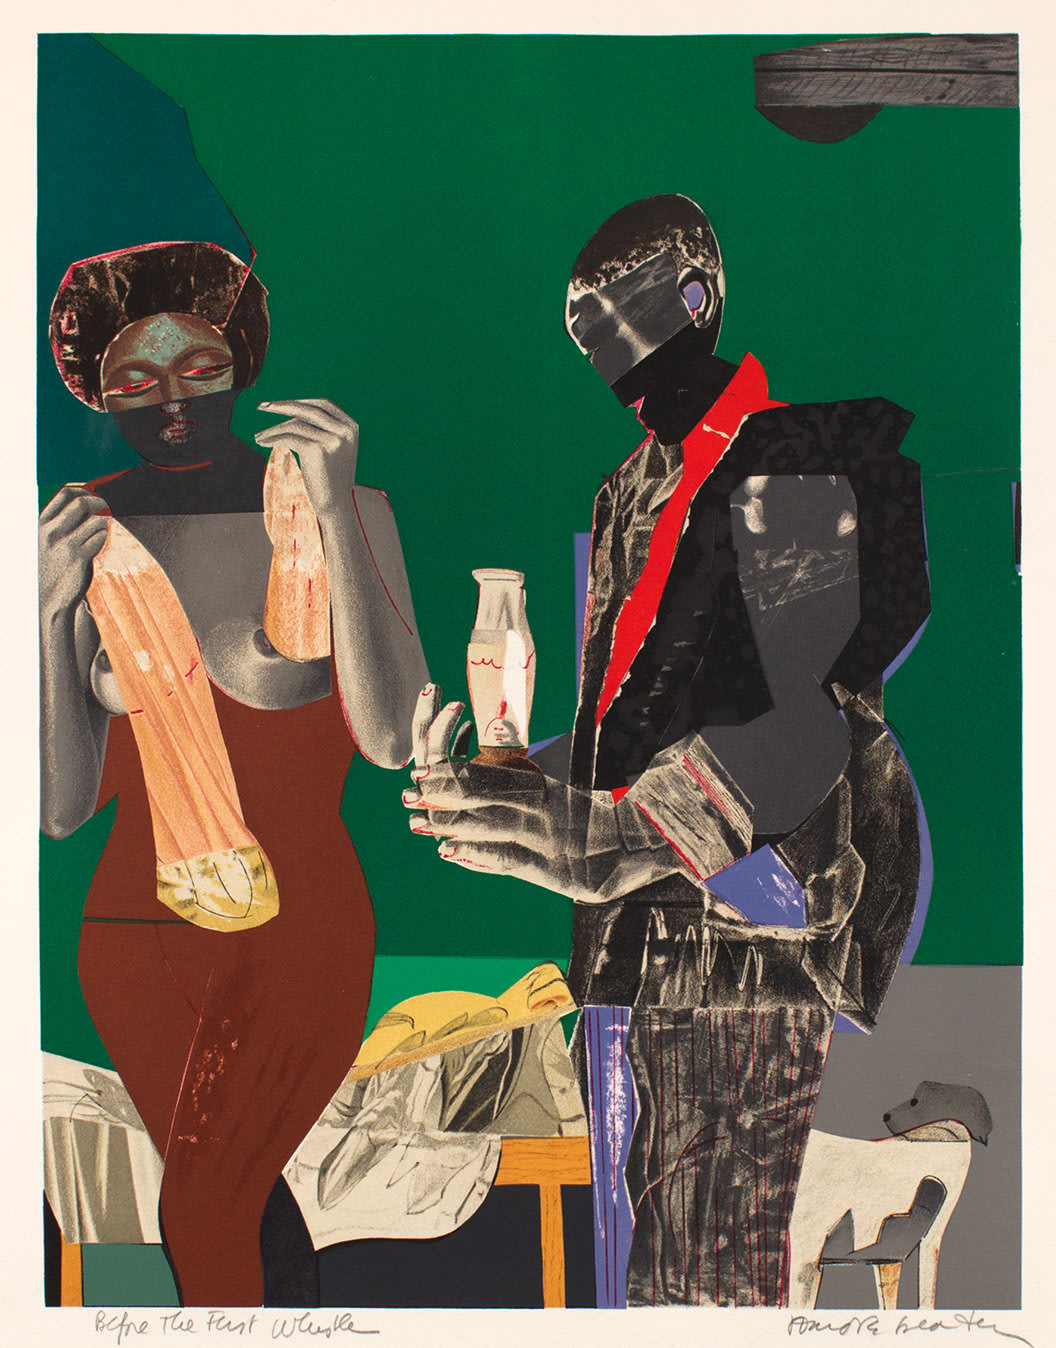 Romare Bearden, BEFORE THE FIRST WHISTLE, 1973